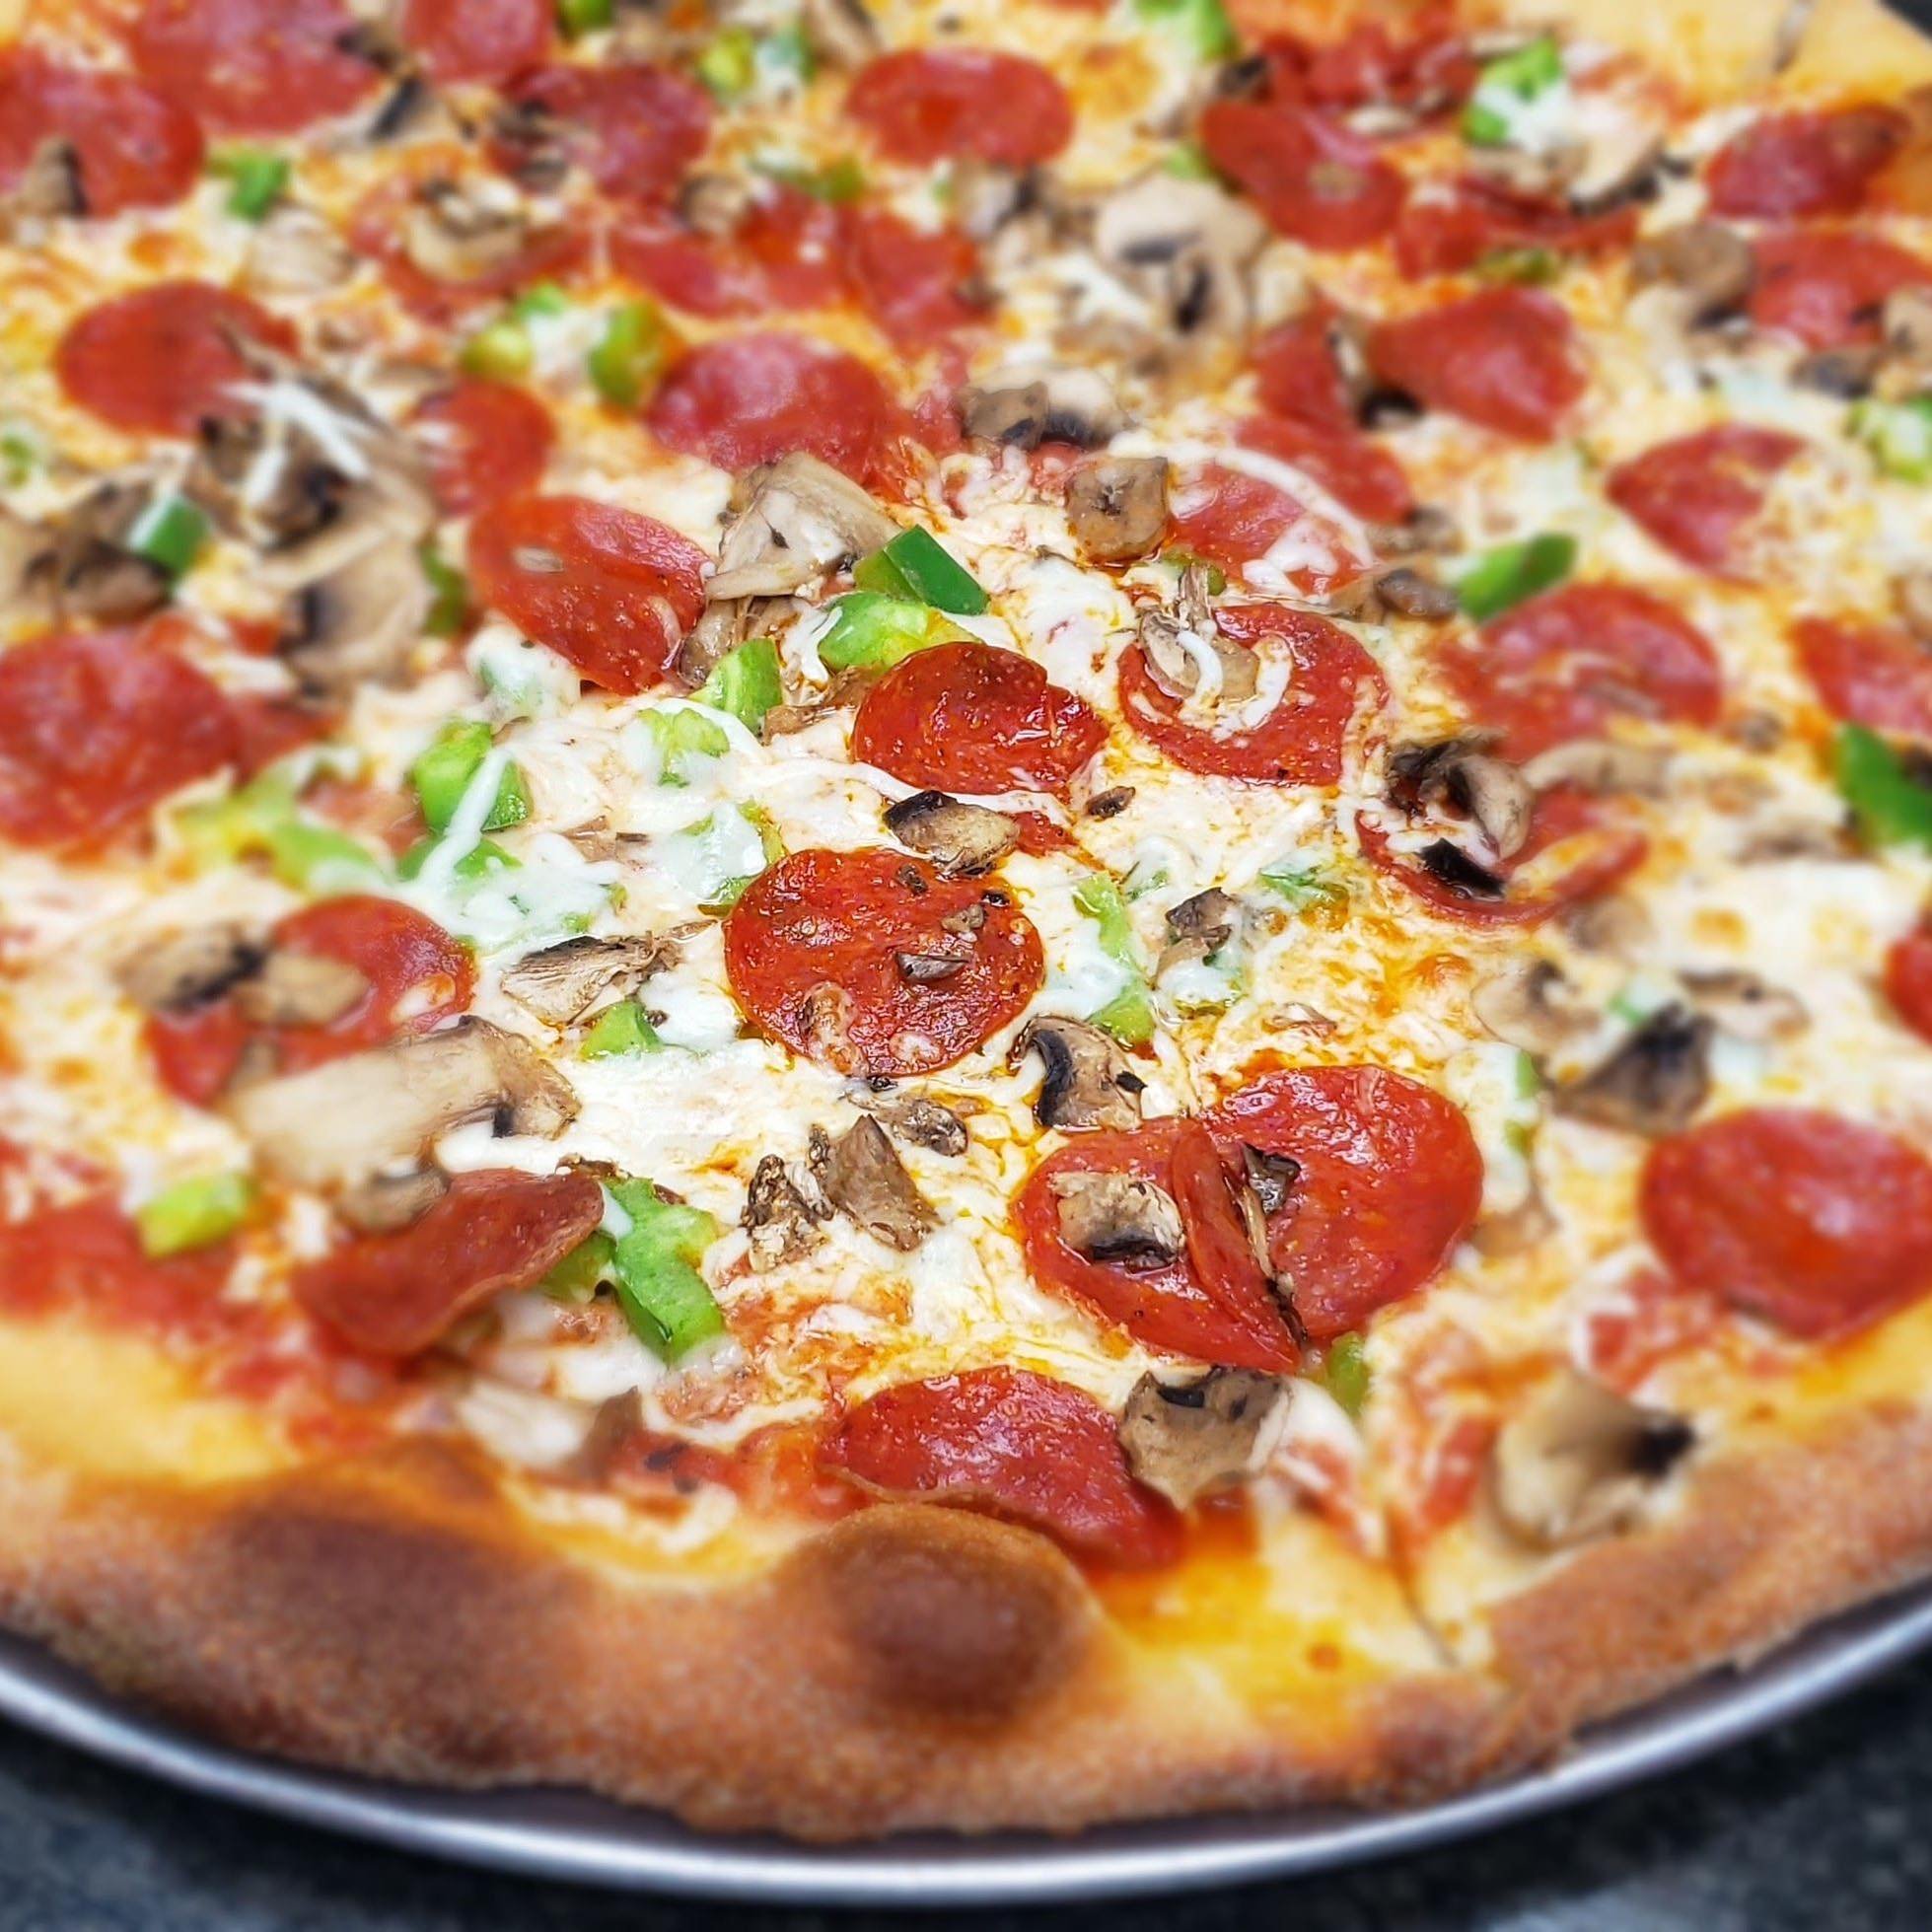 🔦 CLIENT SPOTLIGHT: Pantry Pizza / @pantrypizzadorchester (Dorchester, MA)

Serving the Dorchester community for over 15 years, #PantryPizza is a Greek family-owned neighborhood pizzeria offering an array of thin-crust pizzas with daily-made homemad